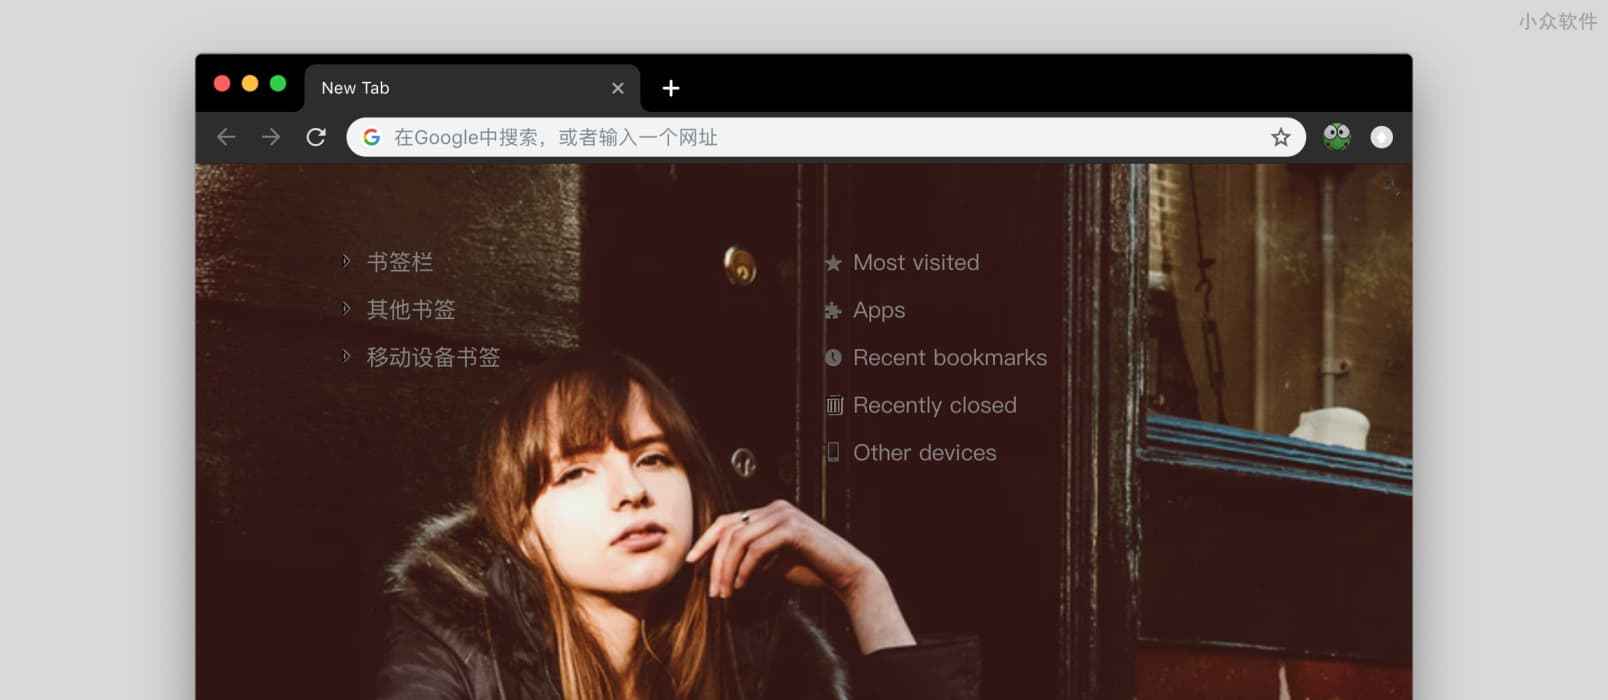 Humble New Tab Page - 朴素、极简的 Chrome/Firefox 新标签页 1